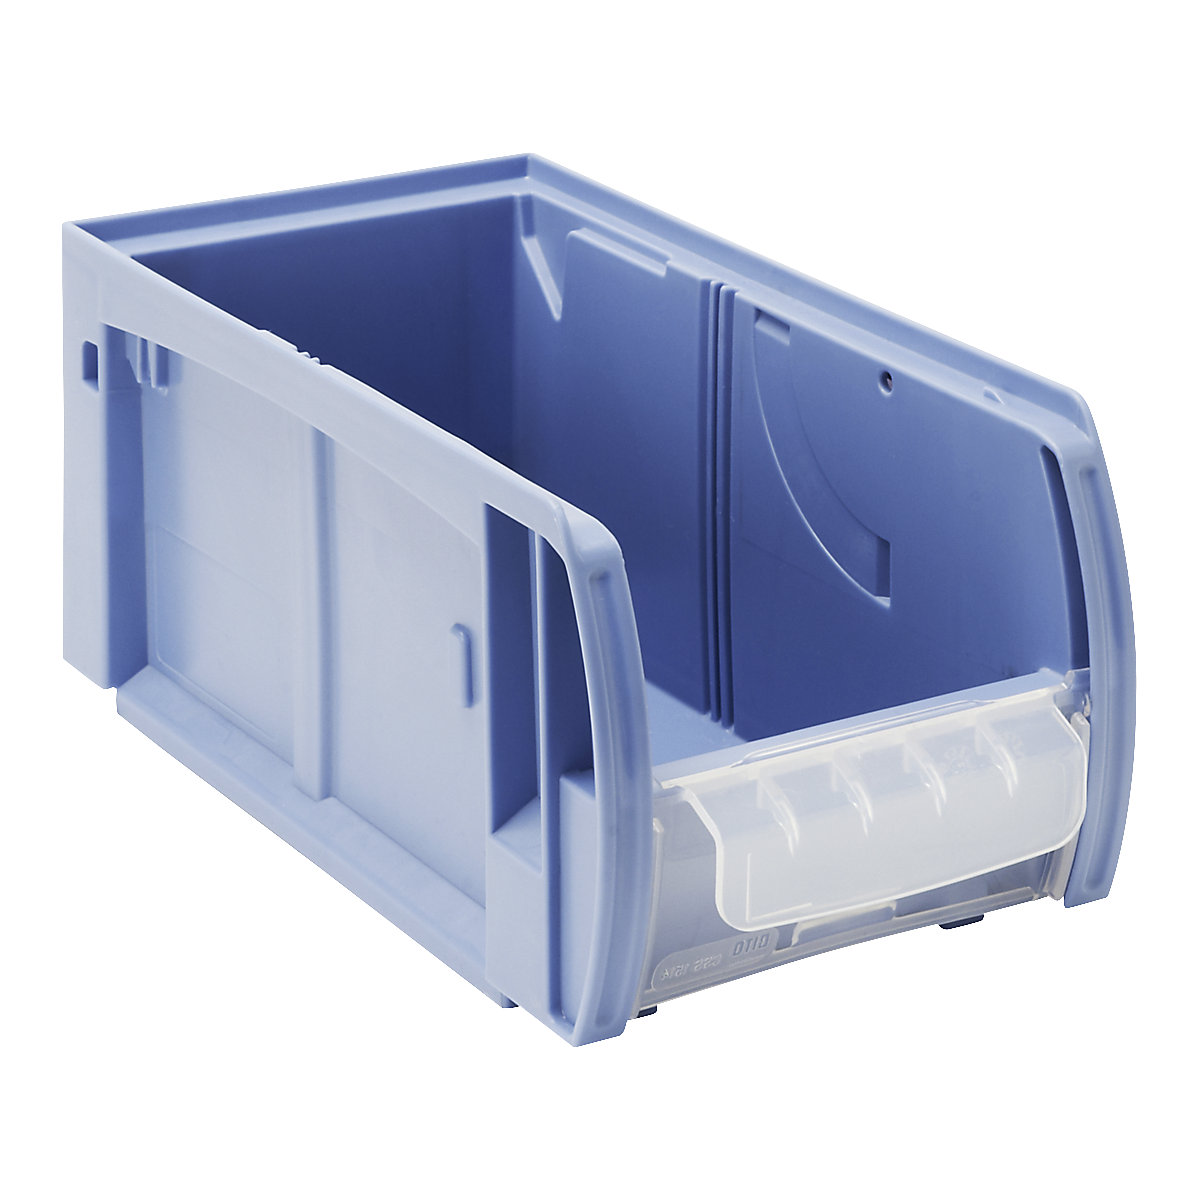 CTB C-parts container open fronted storage bin - BITO